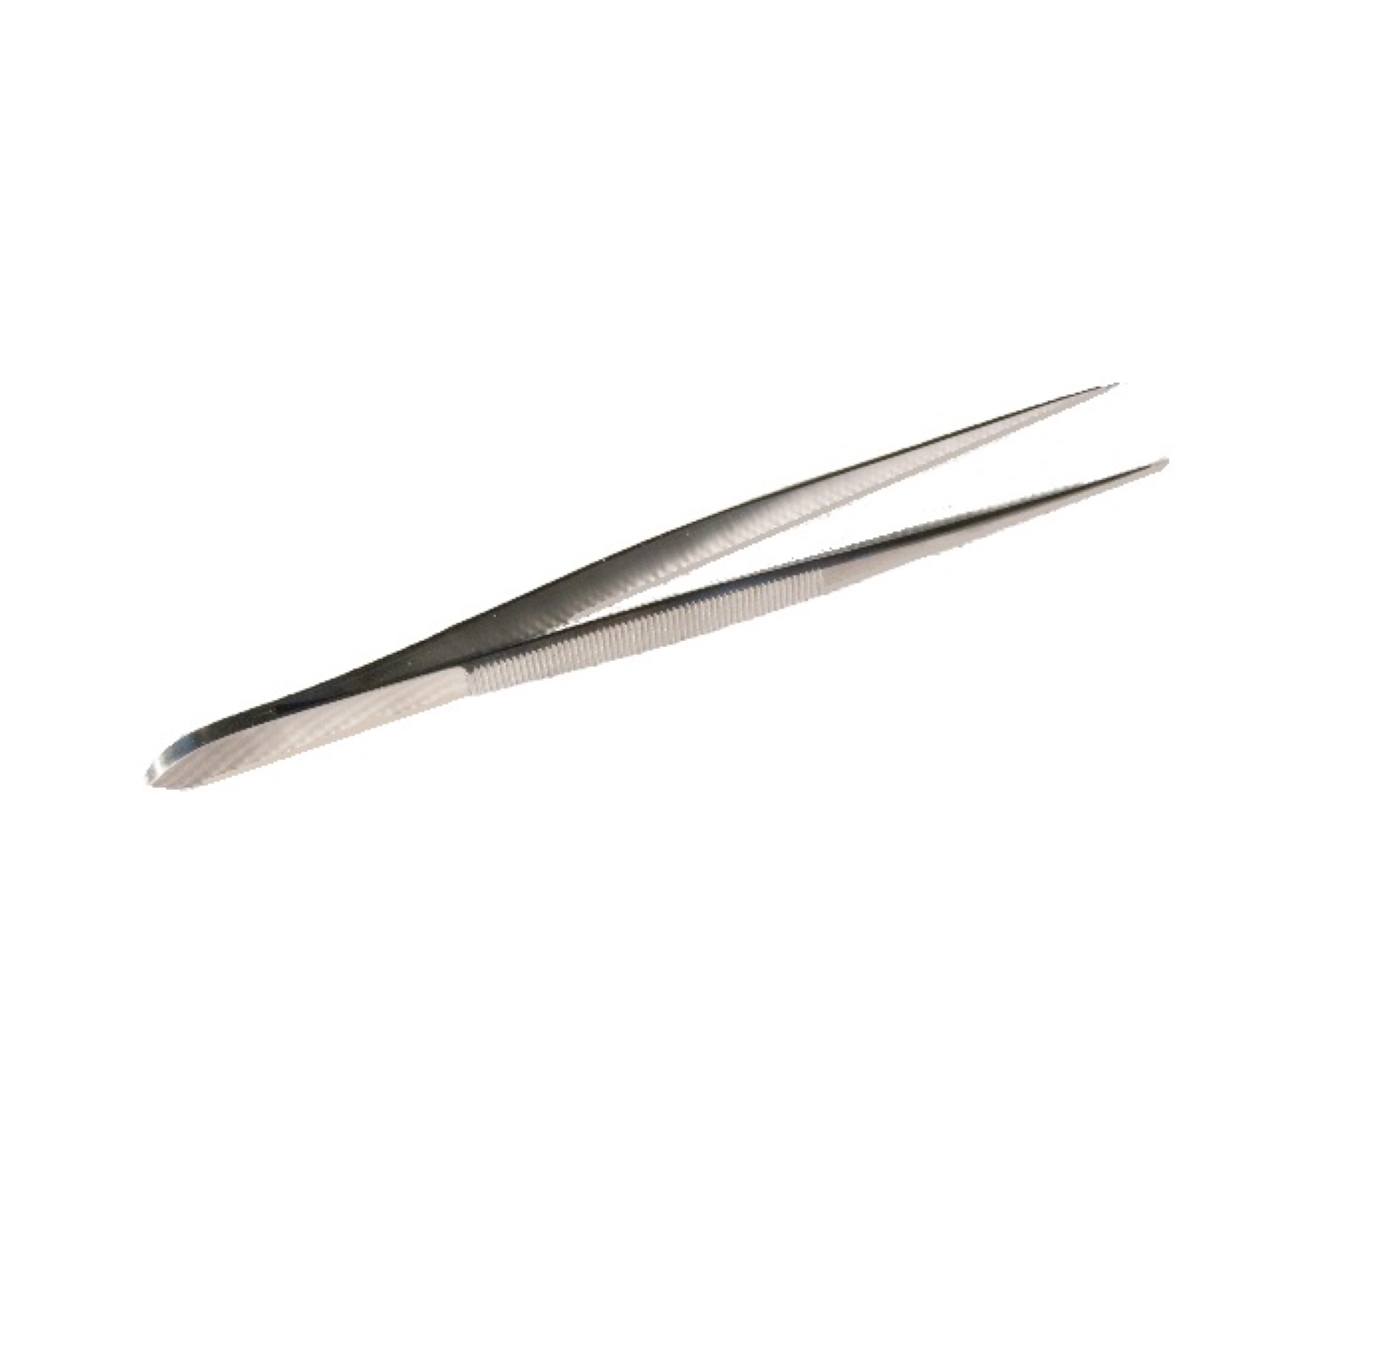 Point tipped tweezers.